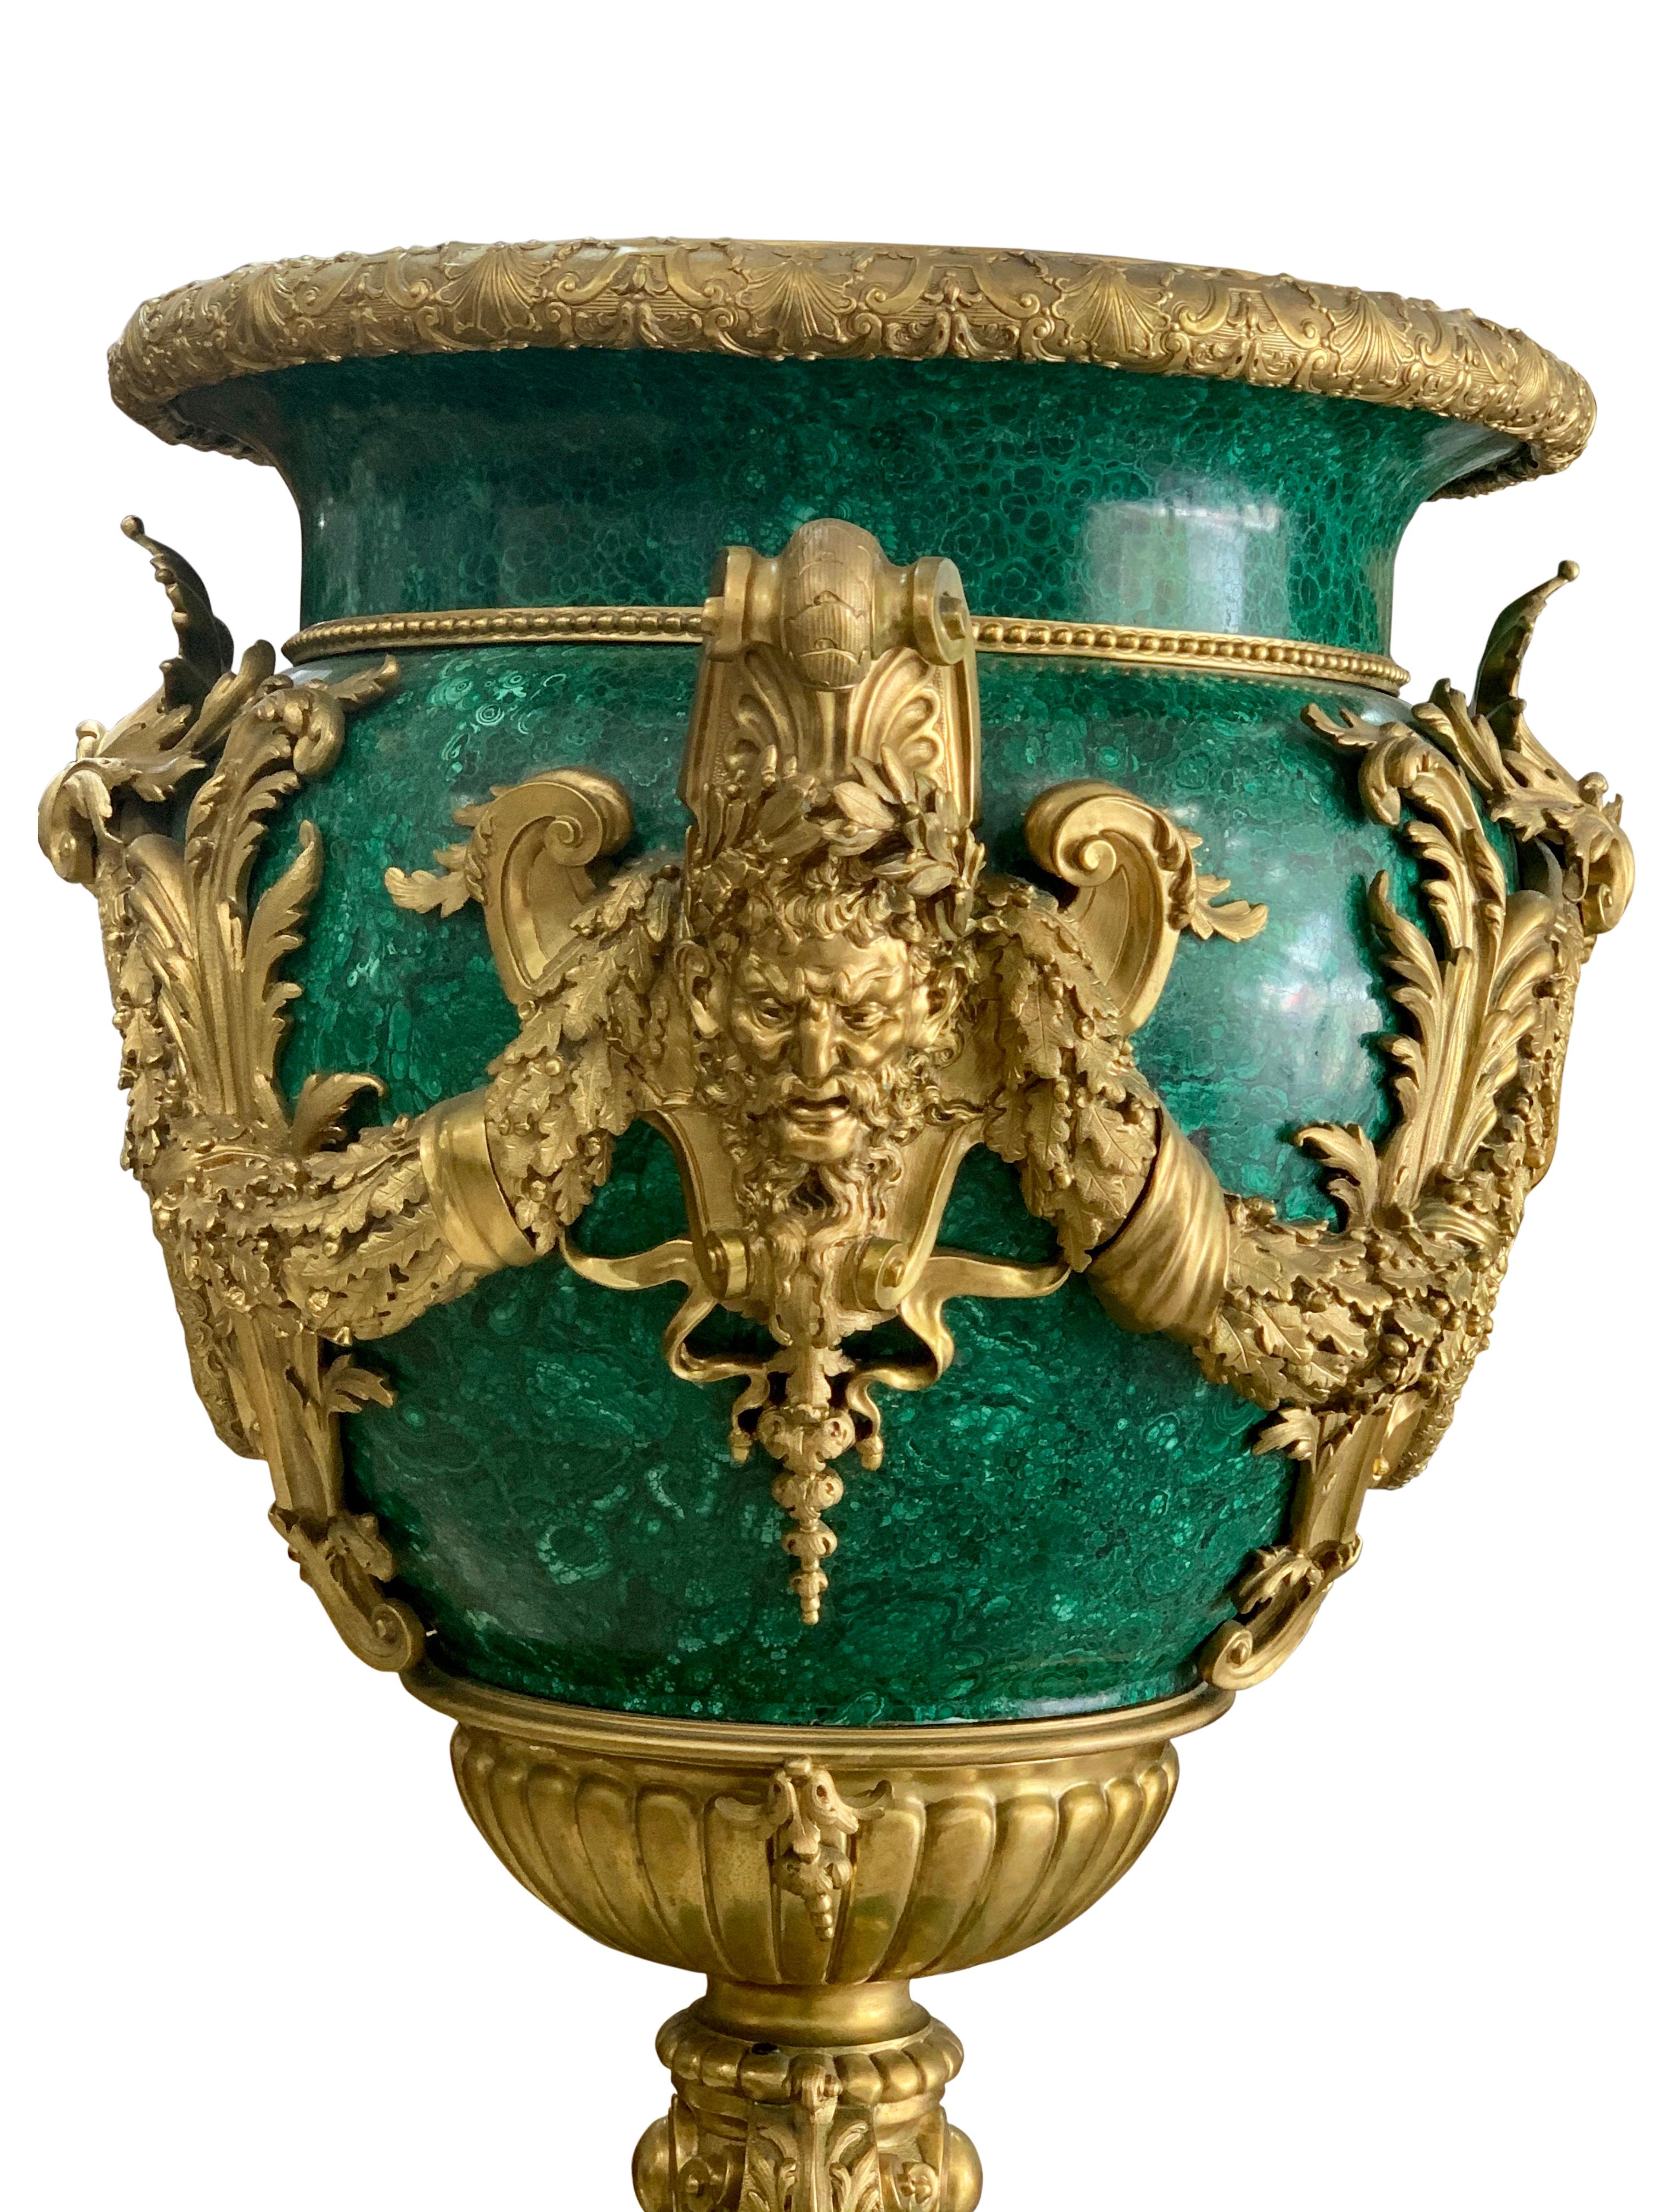 Pair of Monumental Gilt Bronze-Mounted Malachite Urns For Sale 3